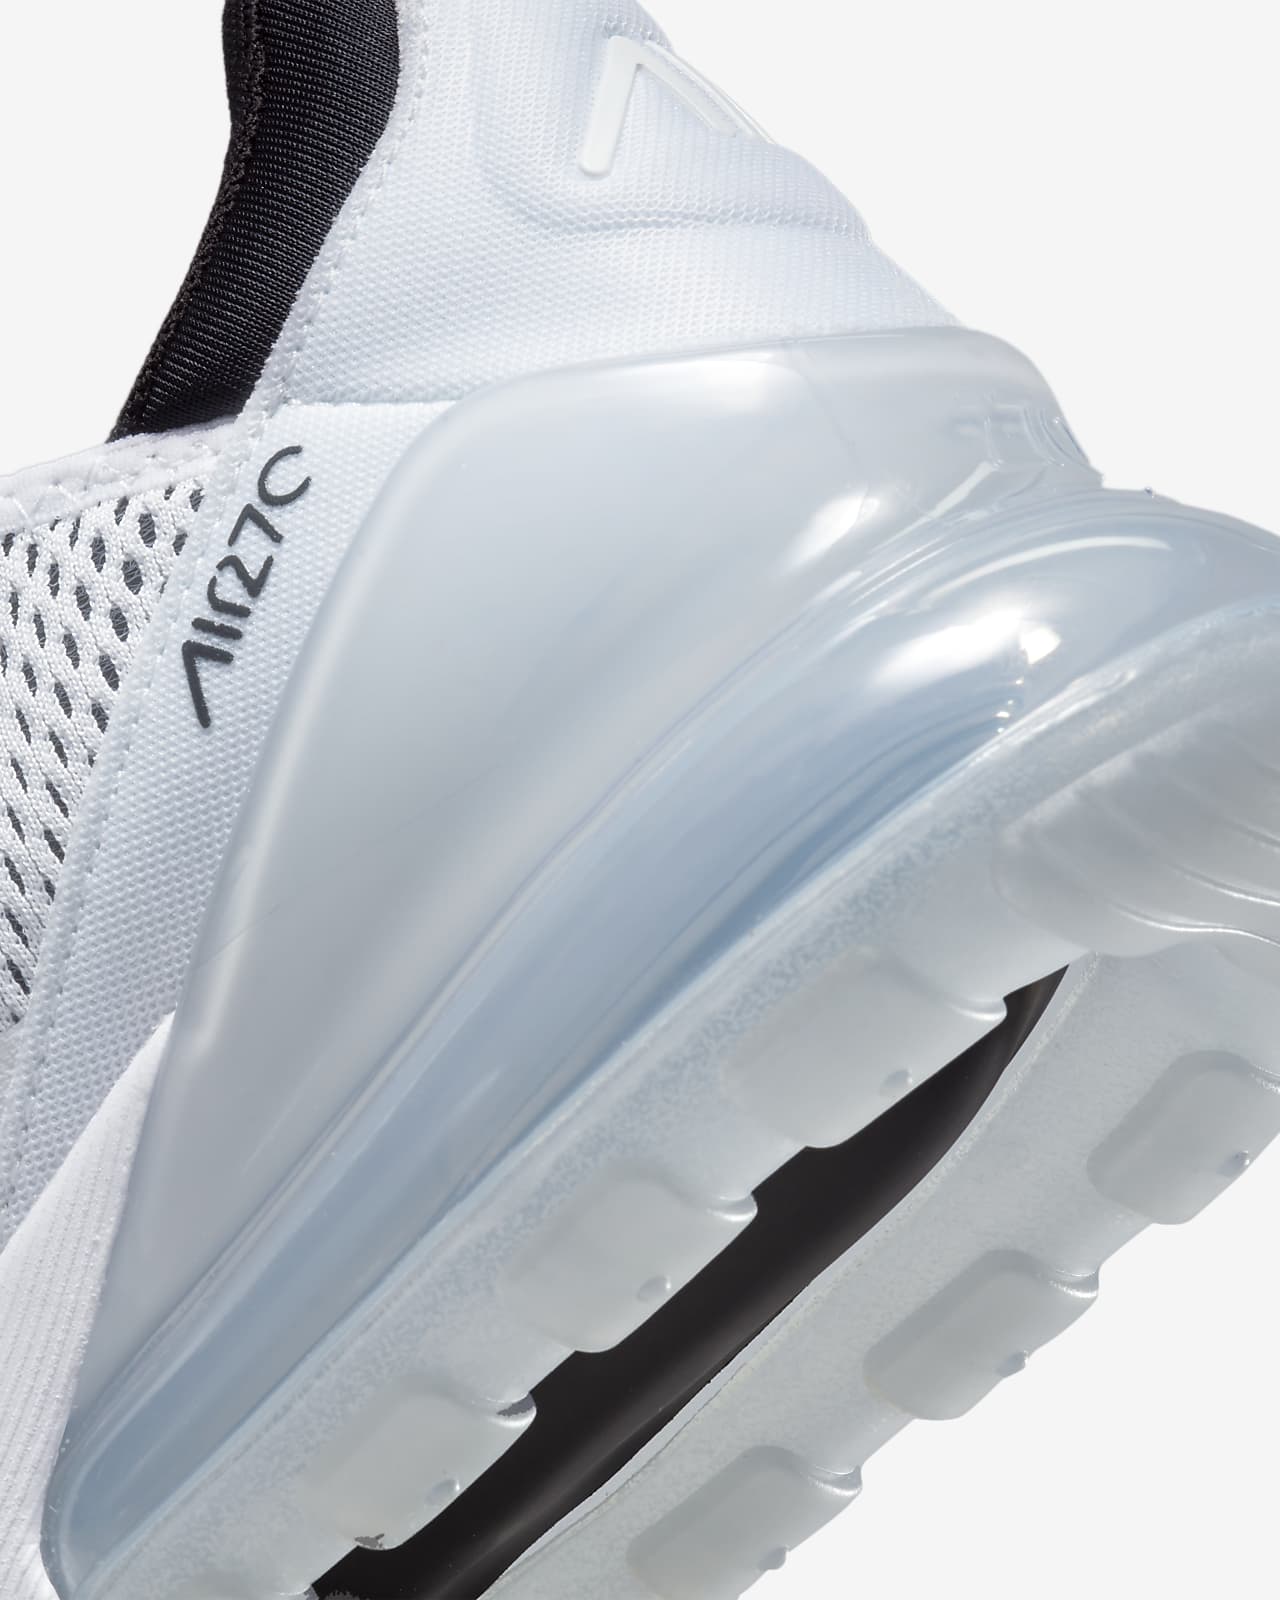 Necessities acidity Insanity Nike Air Max 270 Women's Shoes. Nike.com